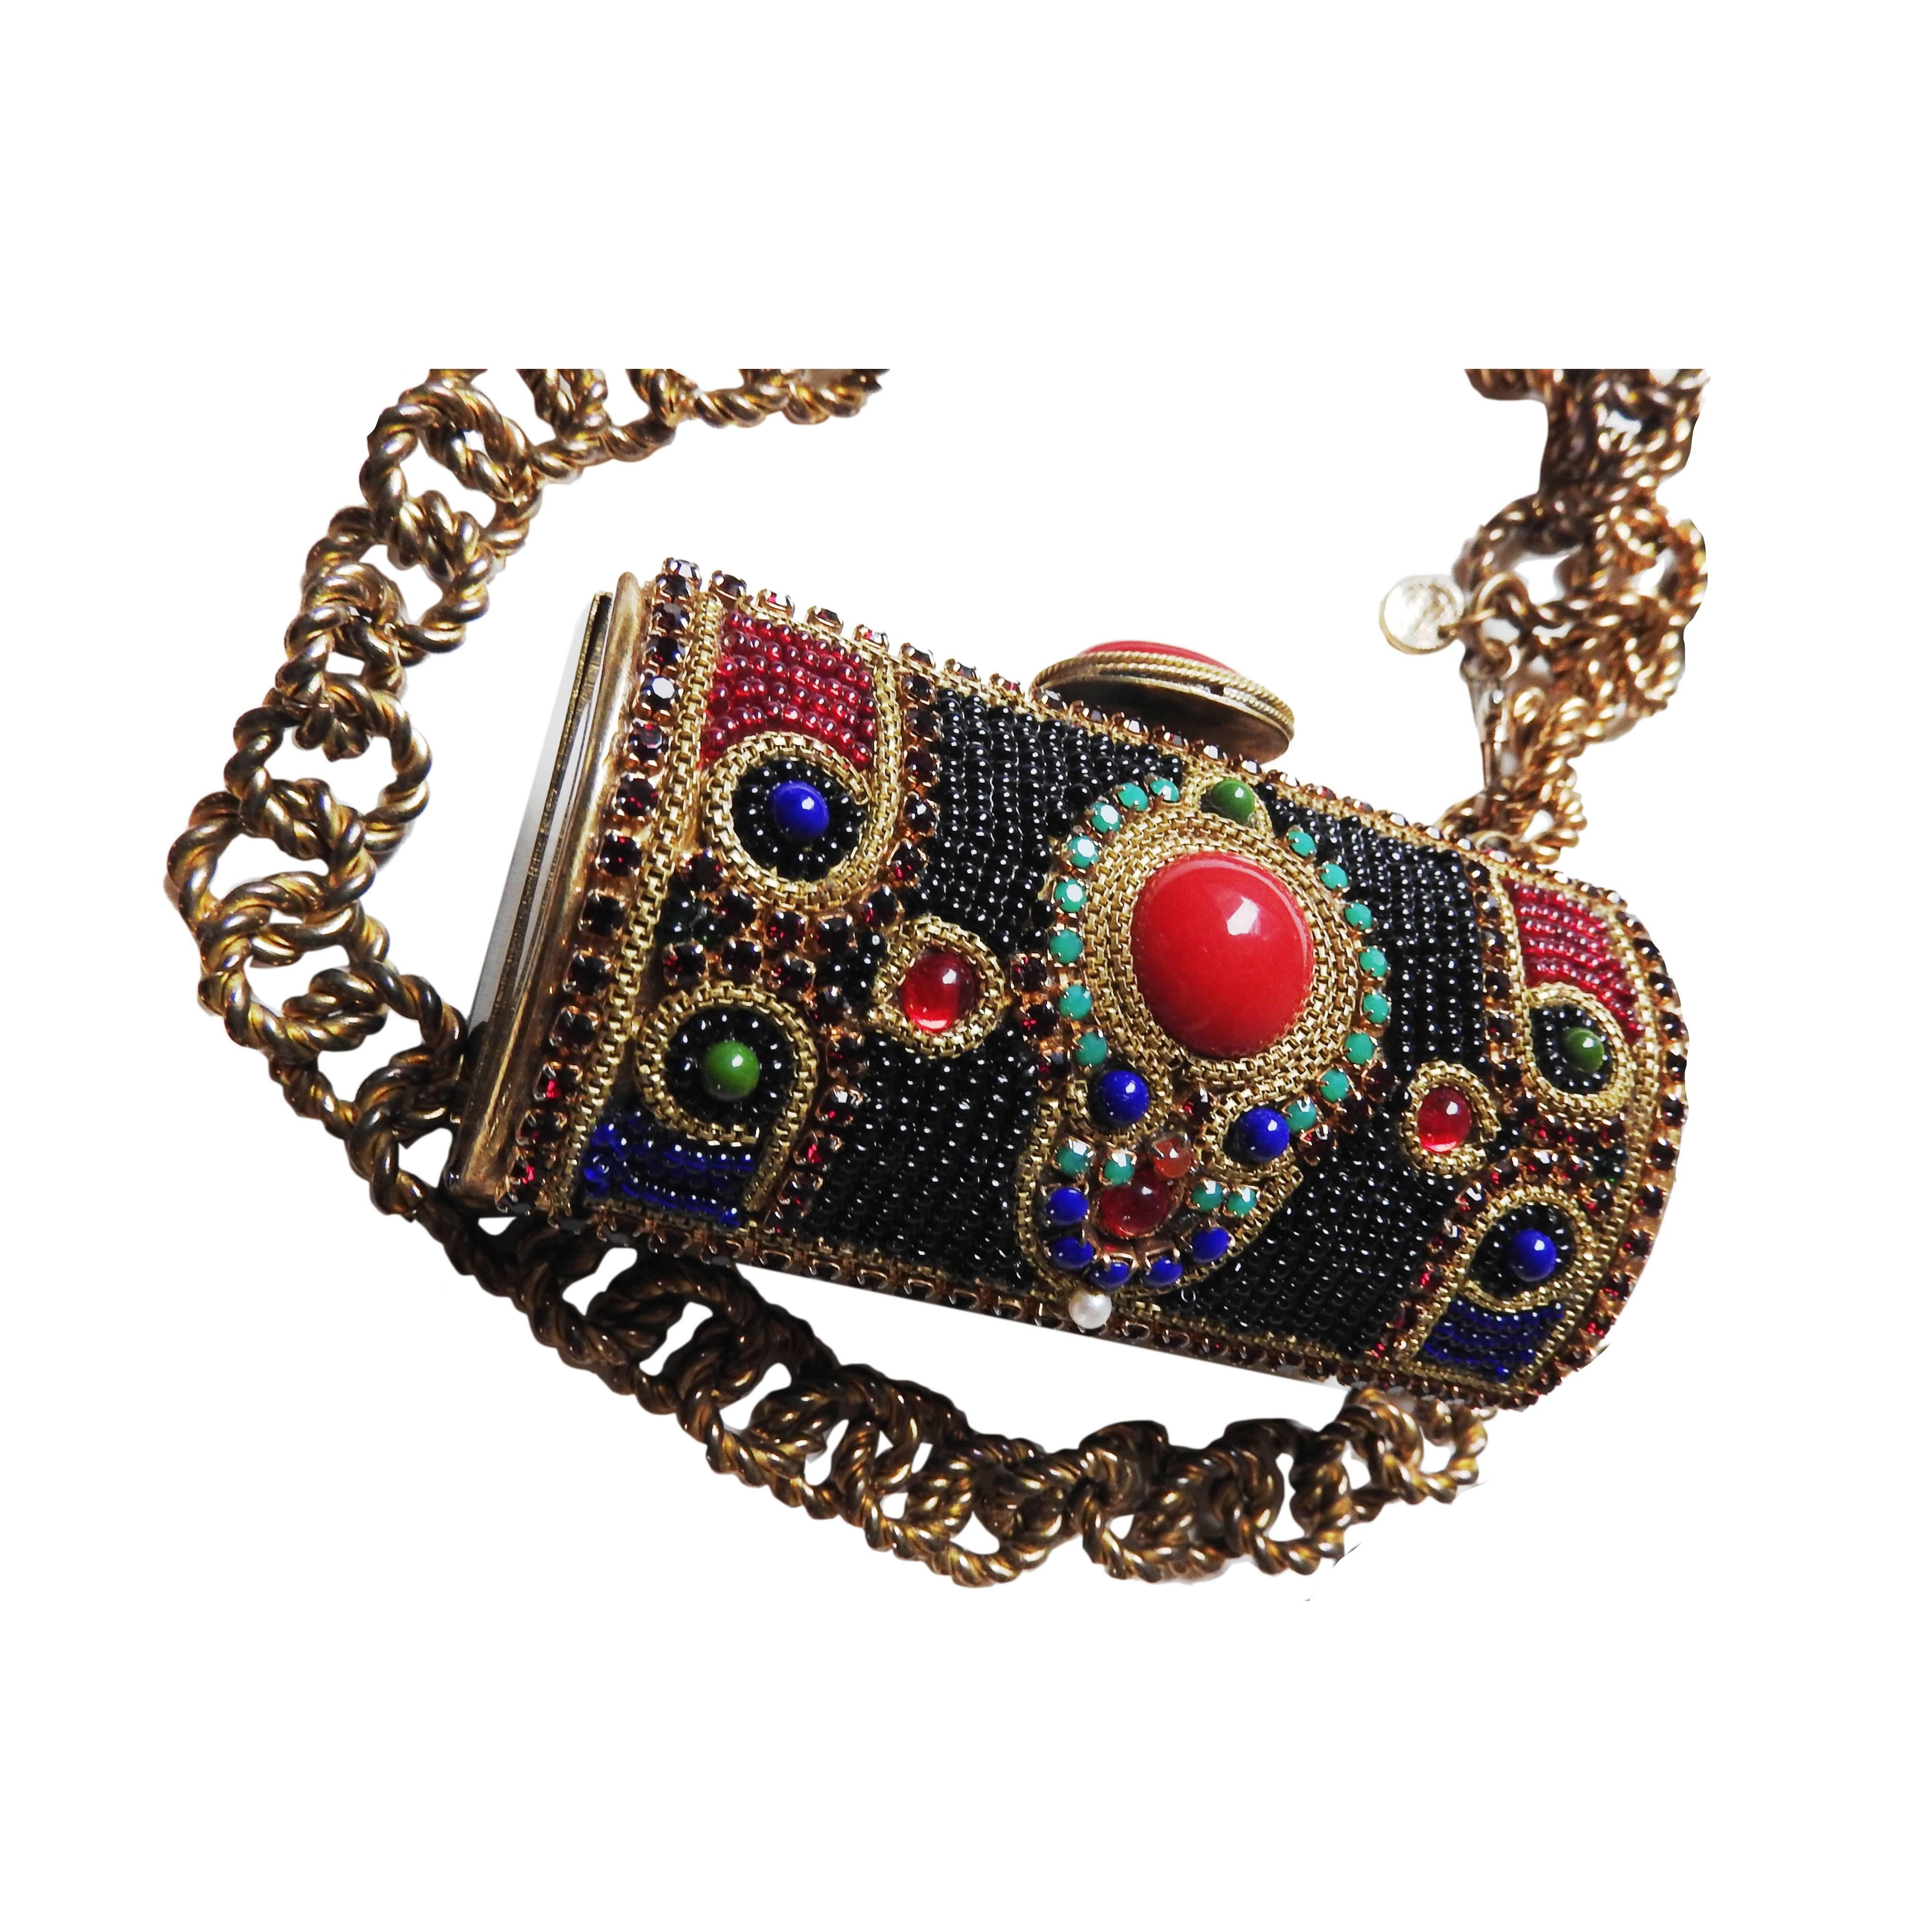 Chanel Vintage 80's Museum Quality Jewelled Metal Purse Clutch Necklace For Sale